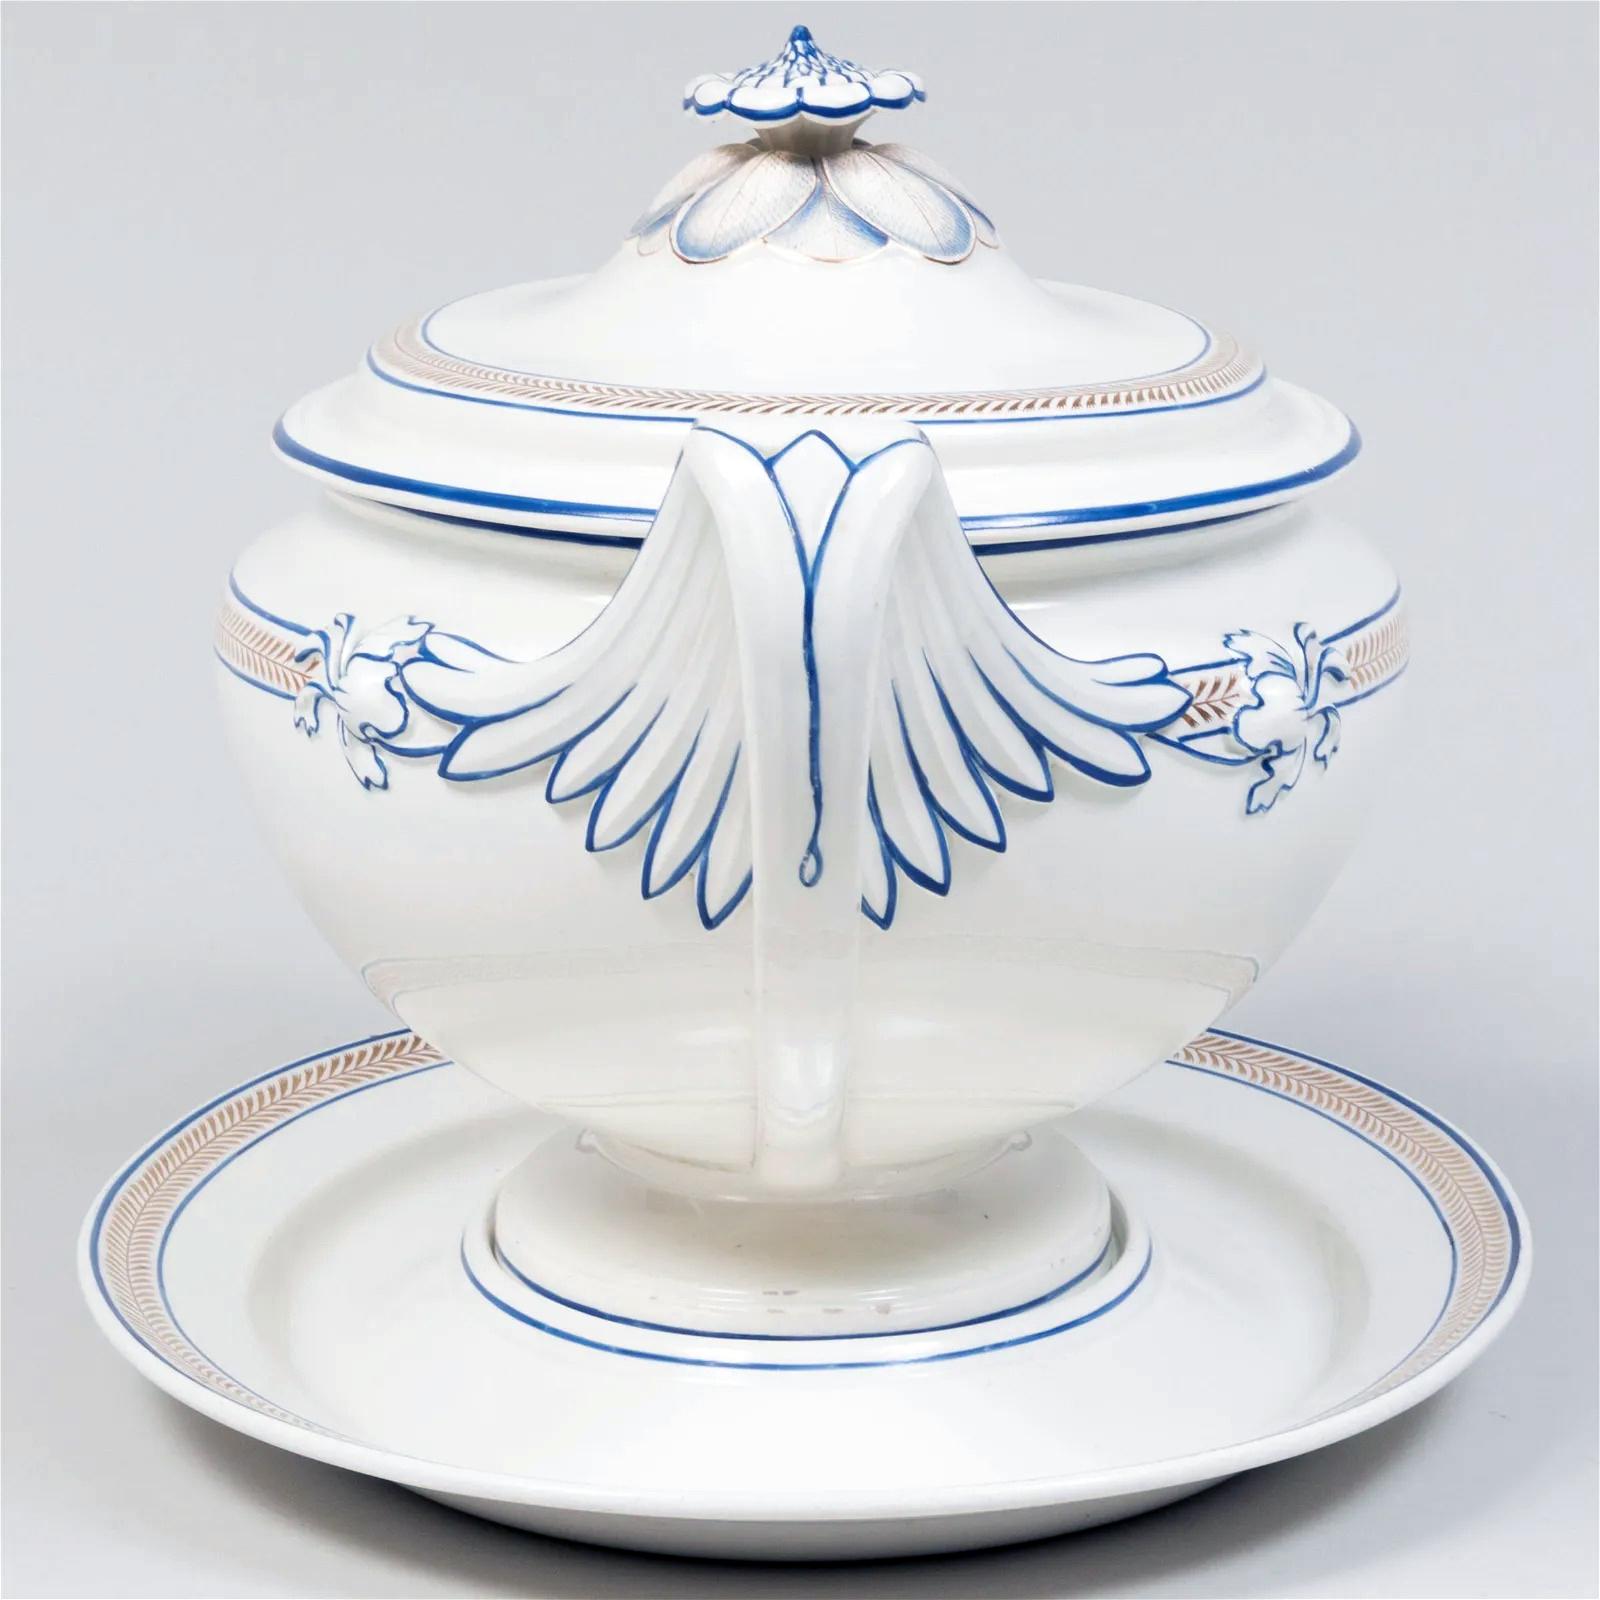 19th Century Wedgwood Creamware Pottery Soup Tureen, Cover & Stand, Pattern #348